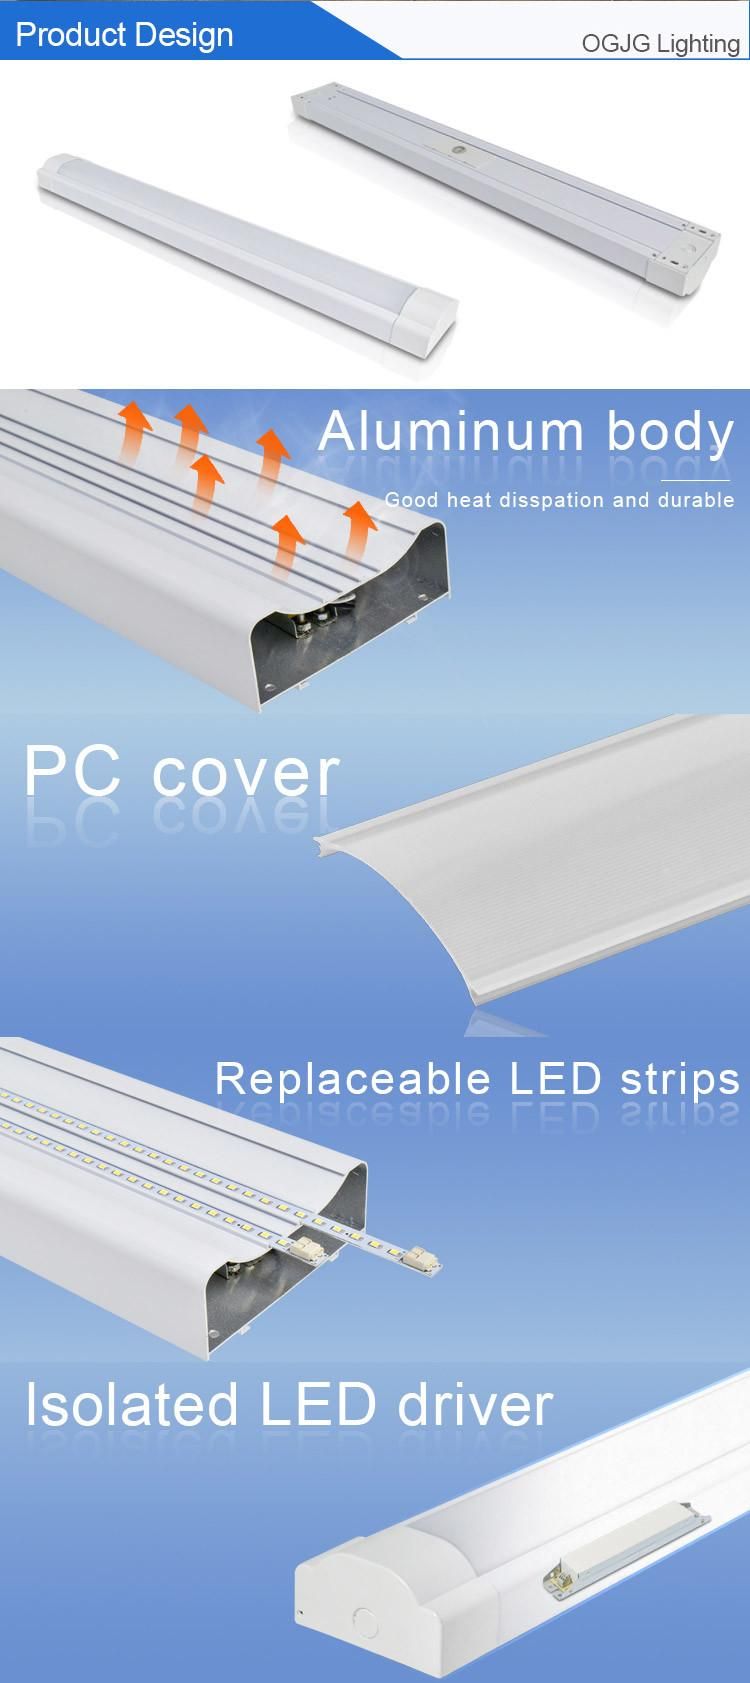 40W Dimmable Pendant Lamp LED Linear Office Commercial Lighting